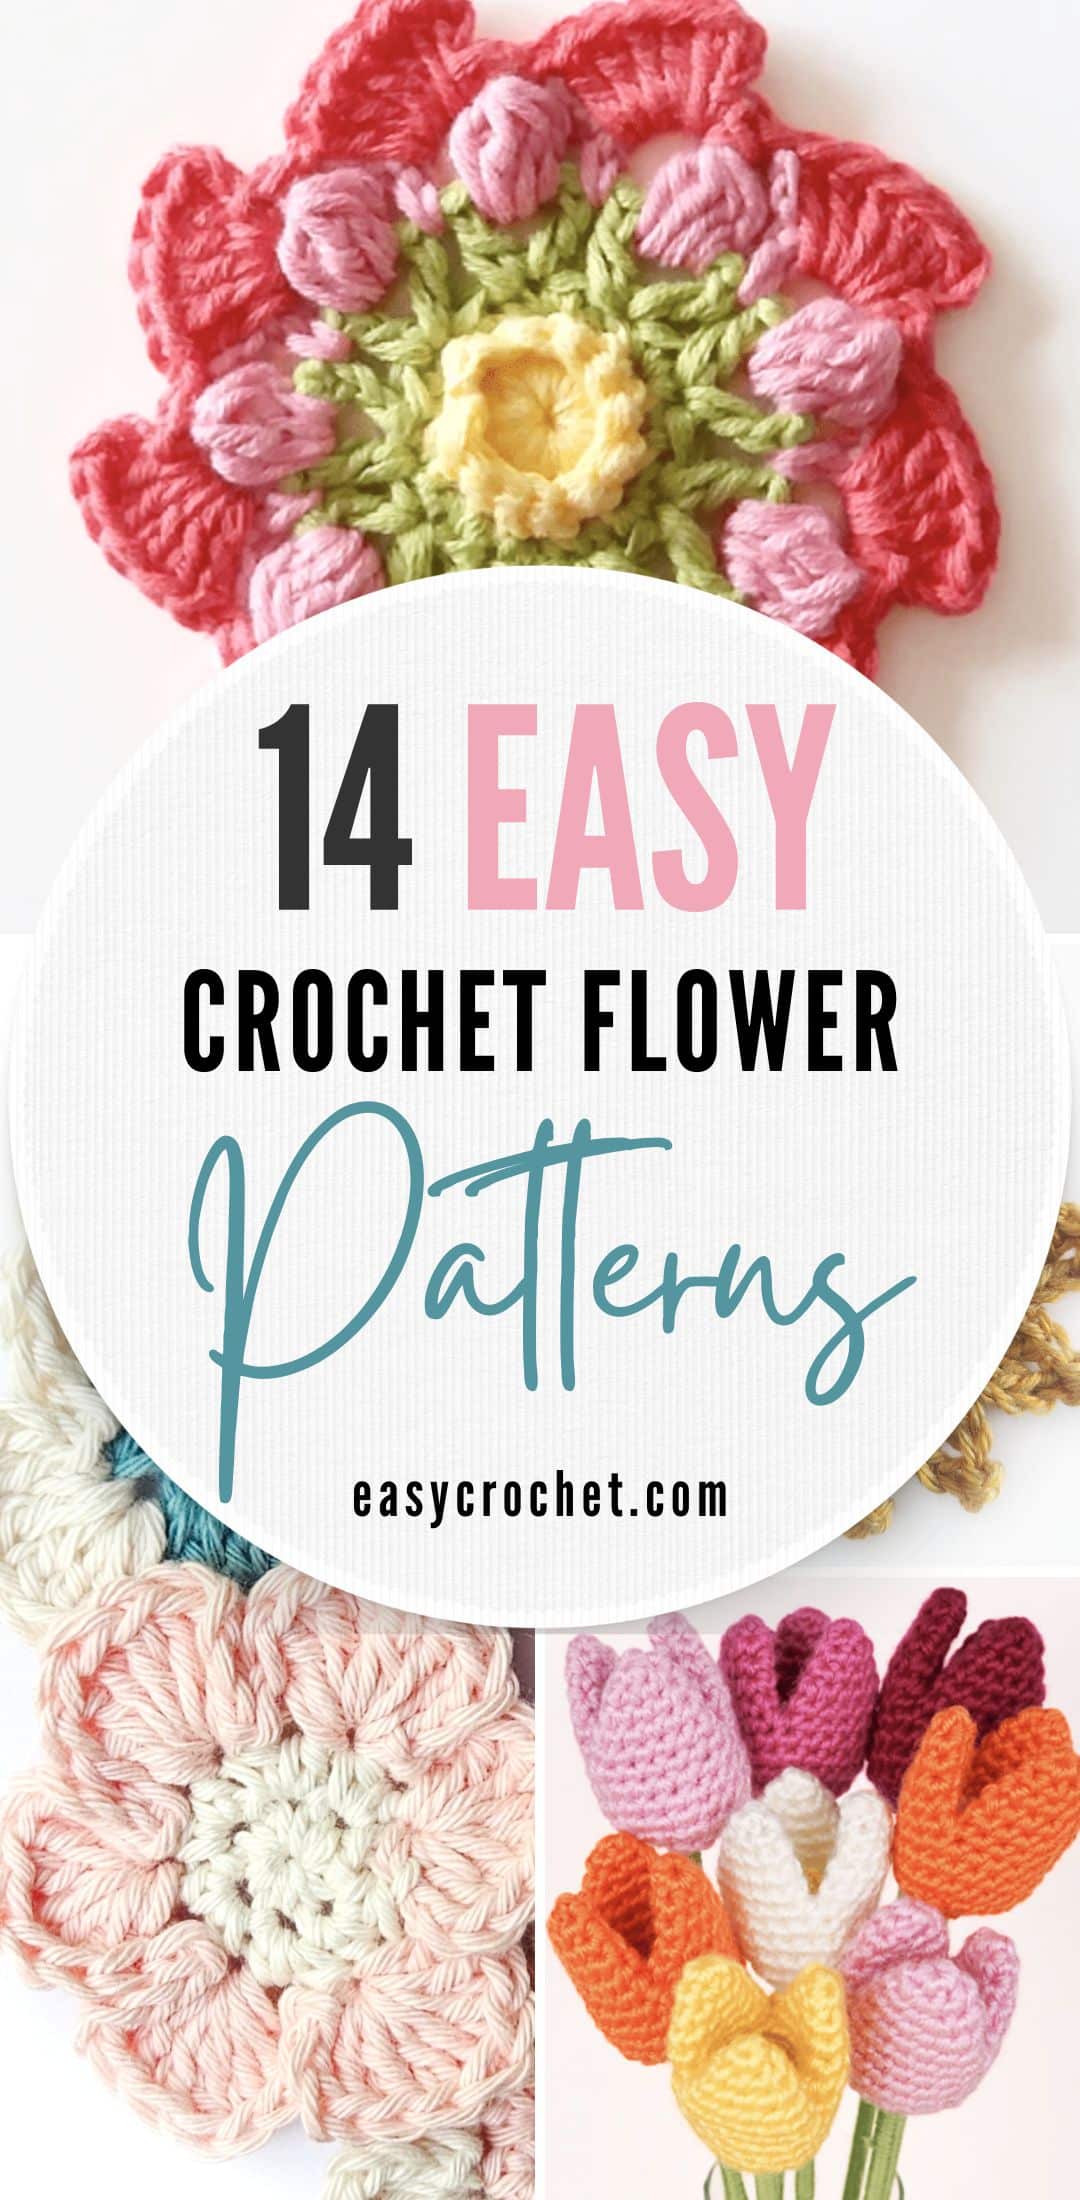 Micro Crochet Flowers Ring / How to crochet a tiny flower with embroidery  thread | Crochet flowers, Crochet jewelry patterns, Crochet